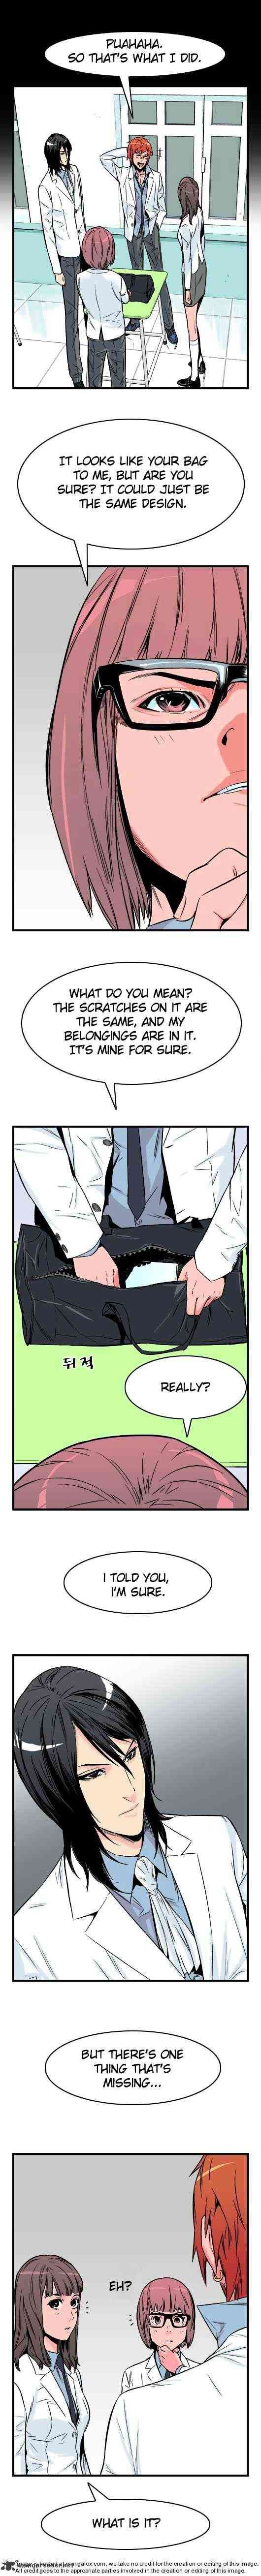 Noblesse Chapter 22 _ Chapters 22-30 page 18